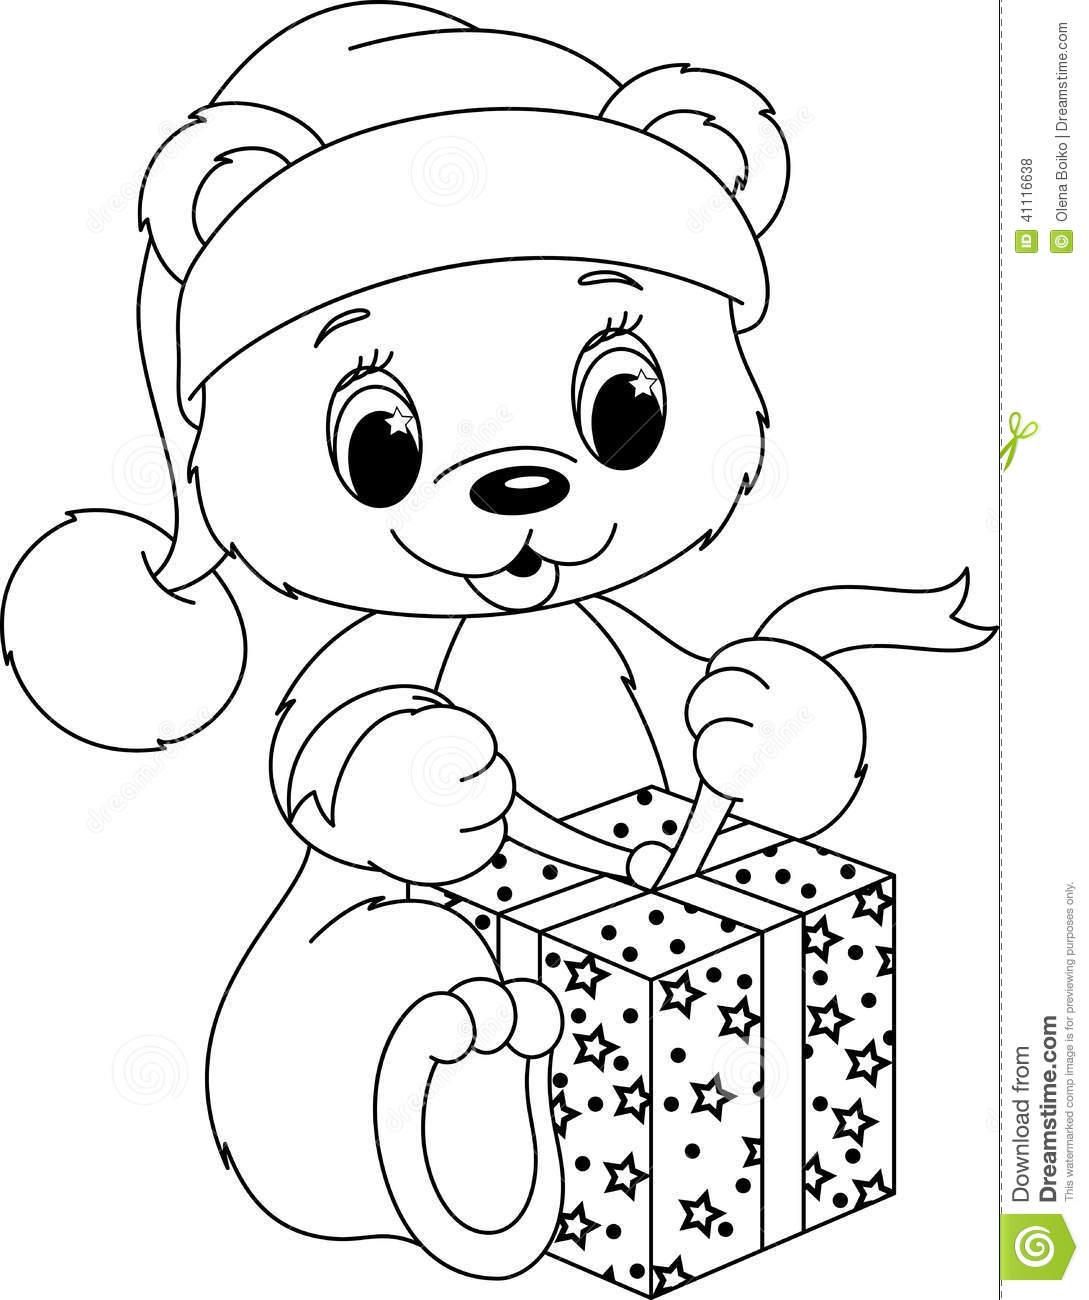 Christmas Bear Coloring Pages at GetColorings.com | Free printable